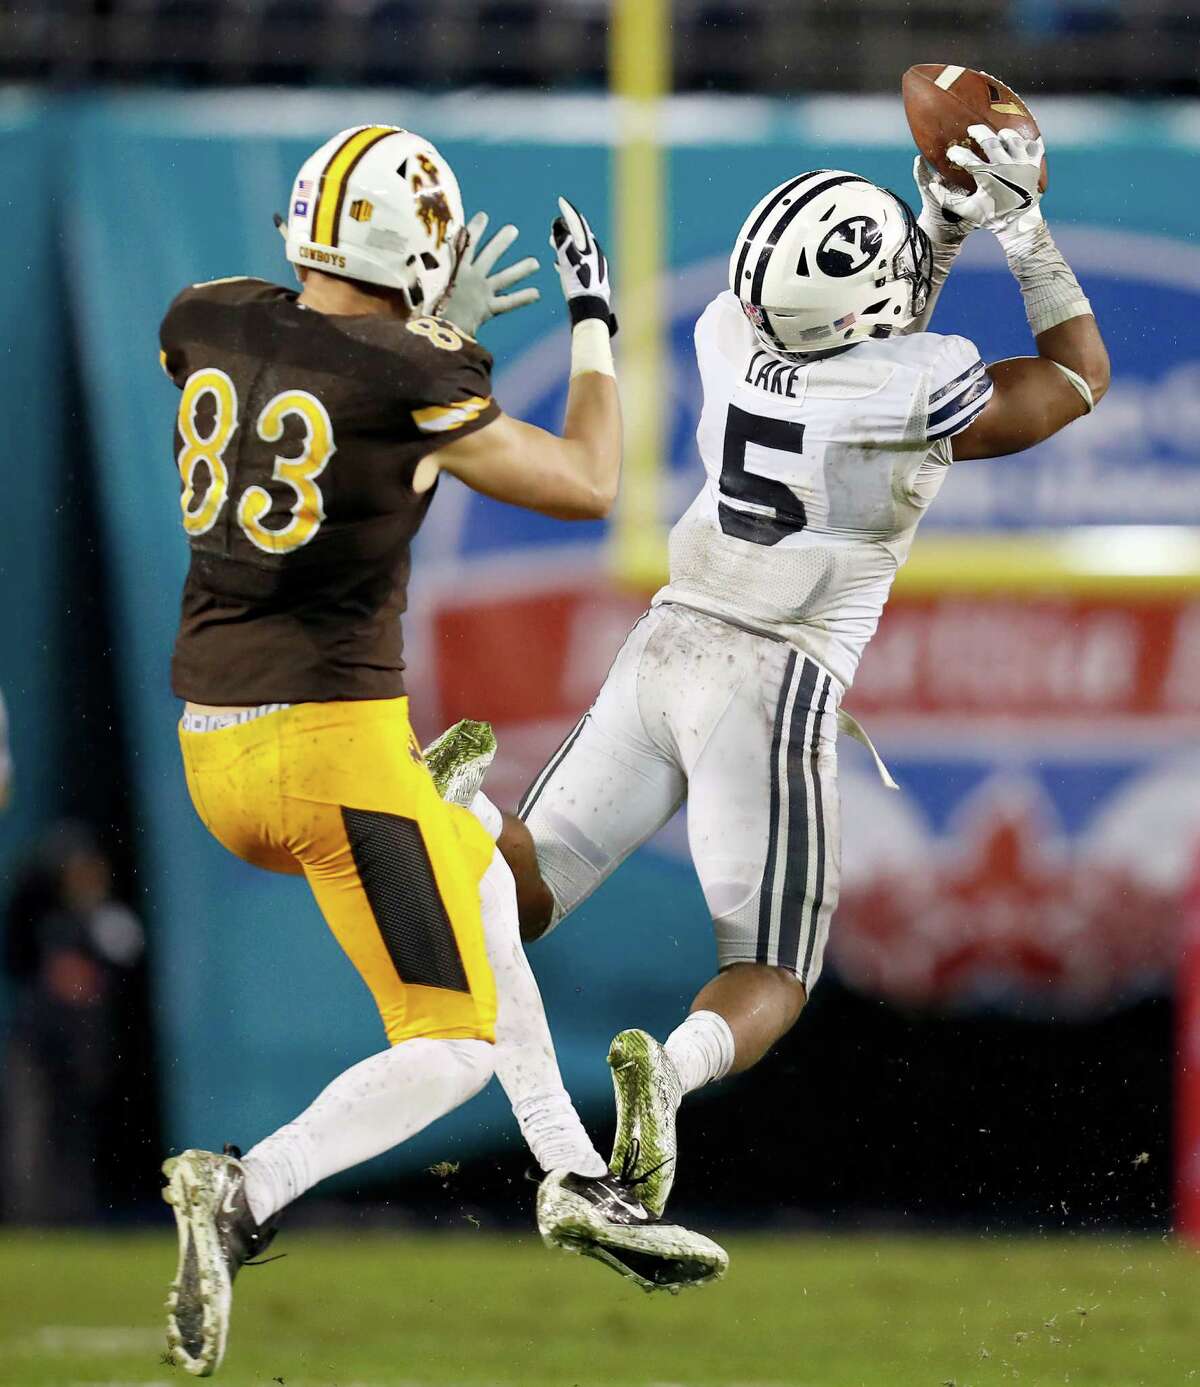 BYU defensive back Dayan Lake, right, intercepts the football in front of Wyoming wide receiver Jake Maulhardt, left, on a pass by quarterback Josh Allen during the first half of the Poinsettia Bowl NCAA college football game Wednesday, Dec. 21, 2016, in San Diego. (AP Photo/Ryan Kang)